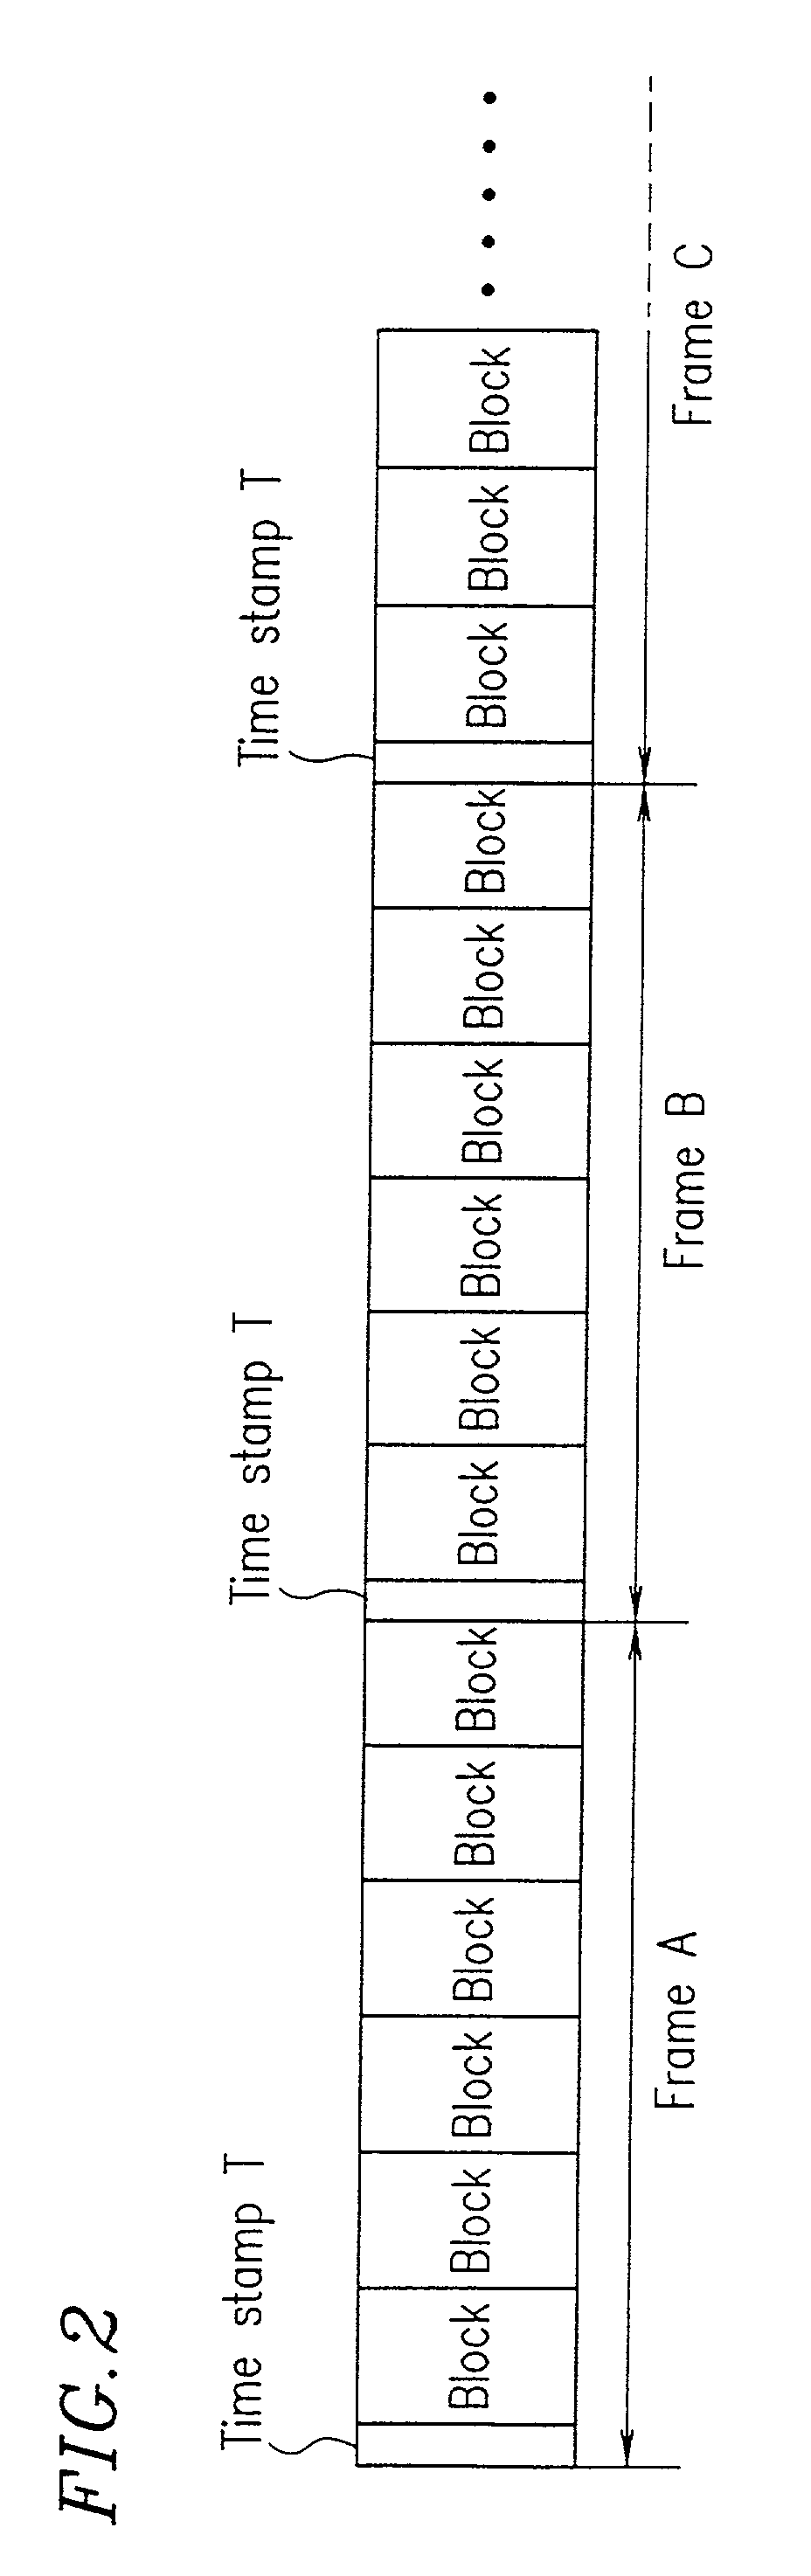 Compressed code decoding device and audio decoding device